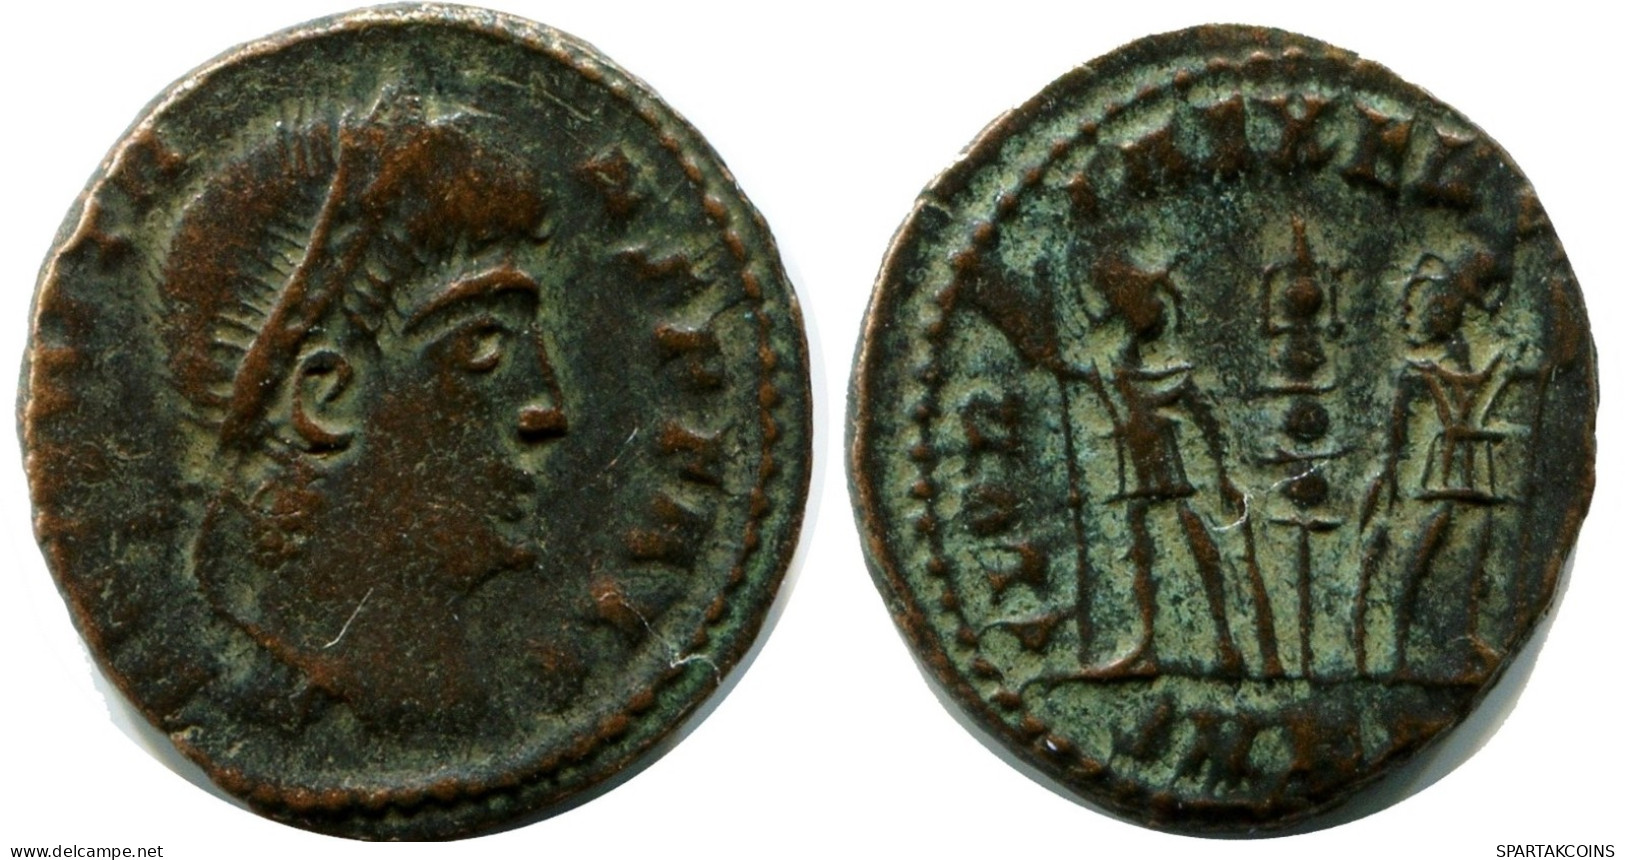 CONSTANS MINTED IN CYZICUS FOUND IN IHNASYAH HOARD EGYPT #ANC11630.14.E.A - L'Empire Chrétien (307 à 363)